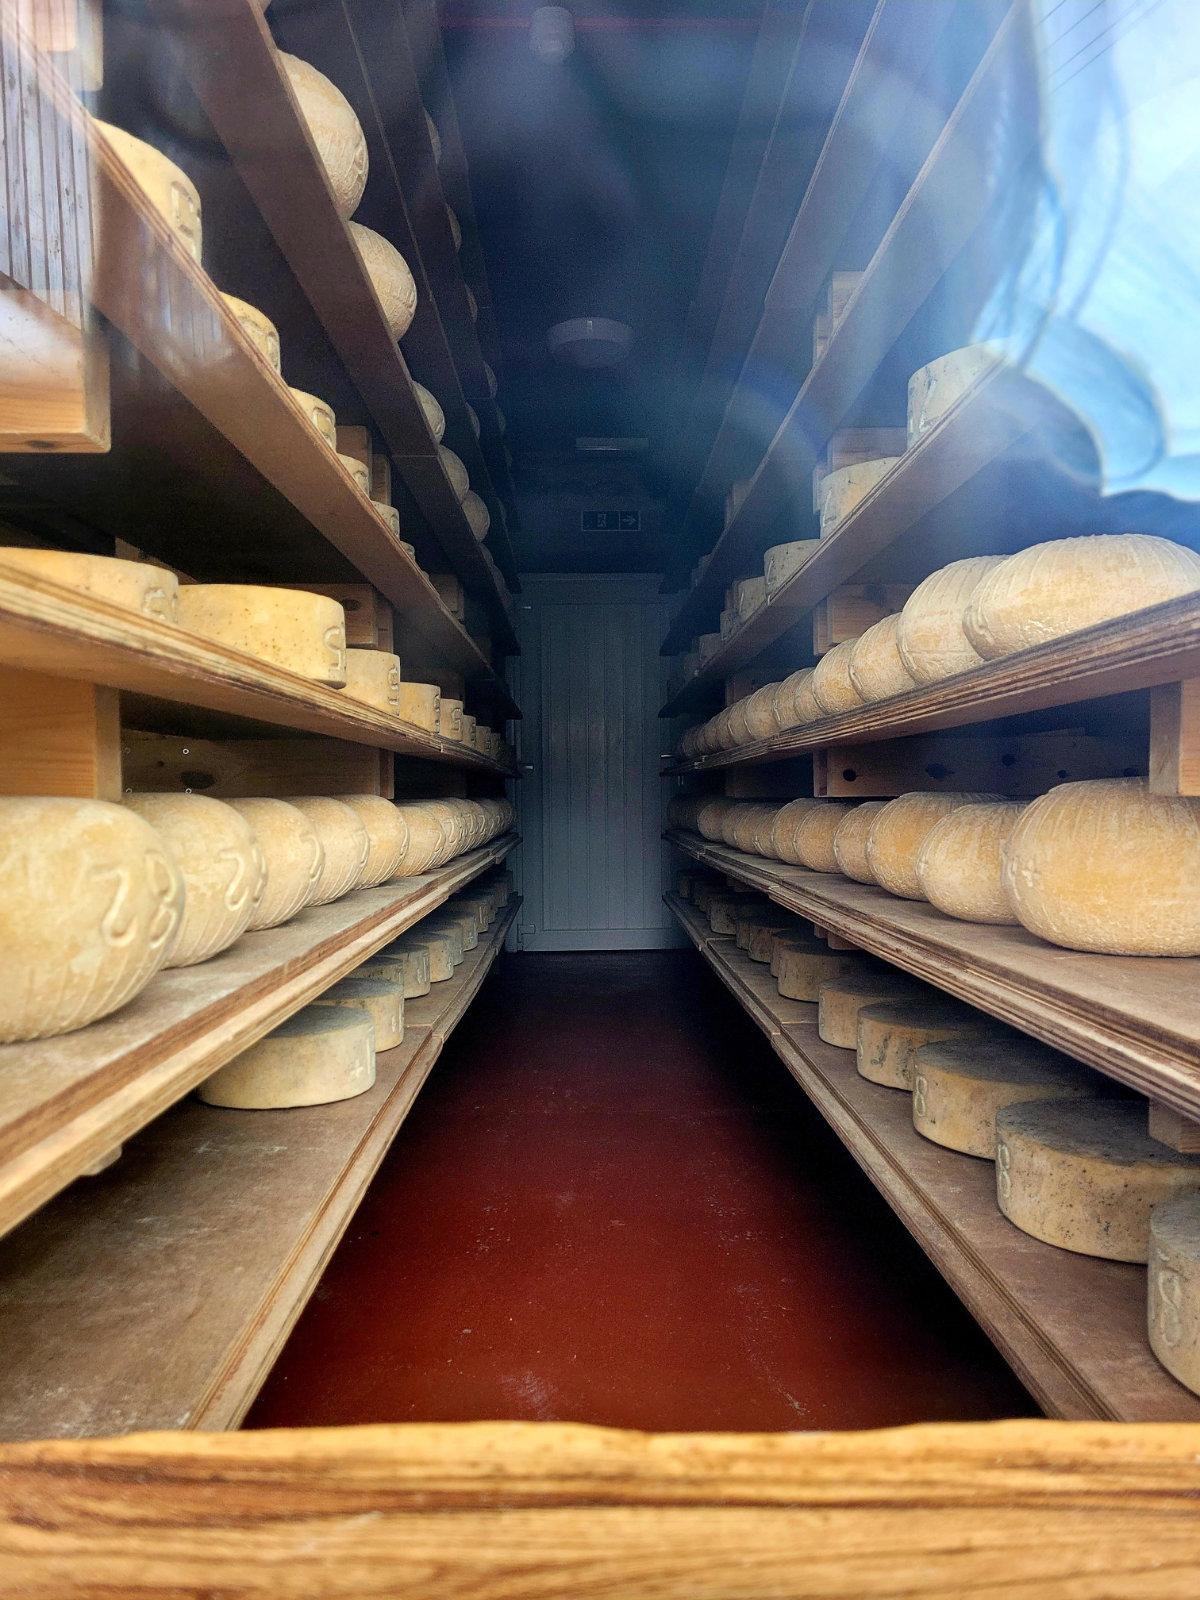 the ethical dairy cheese storage